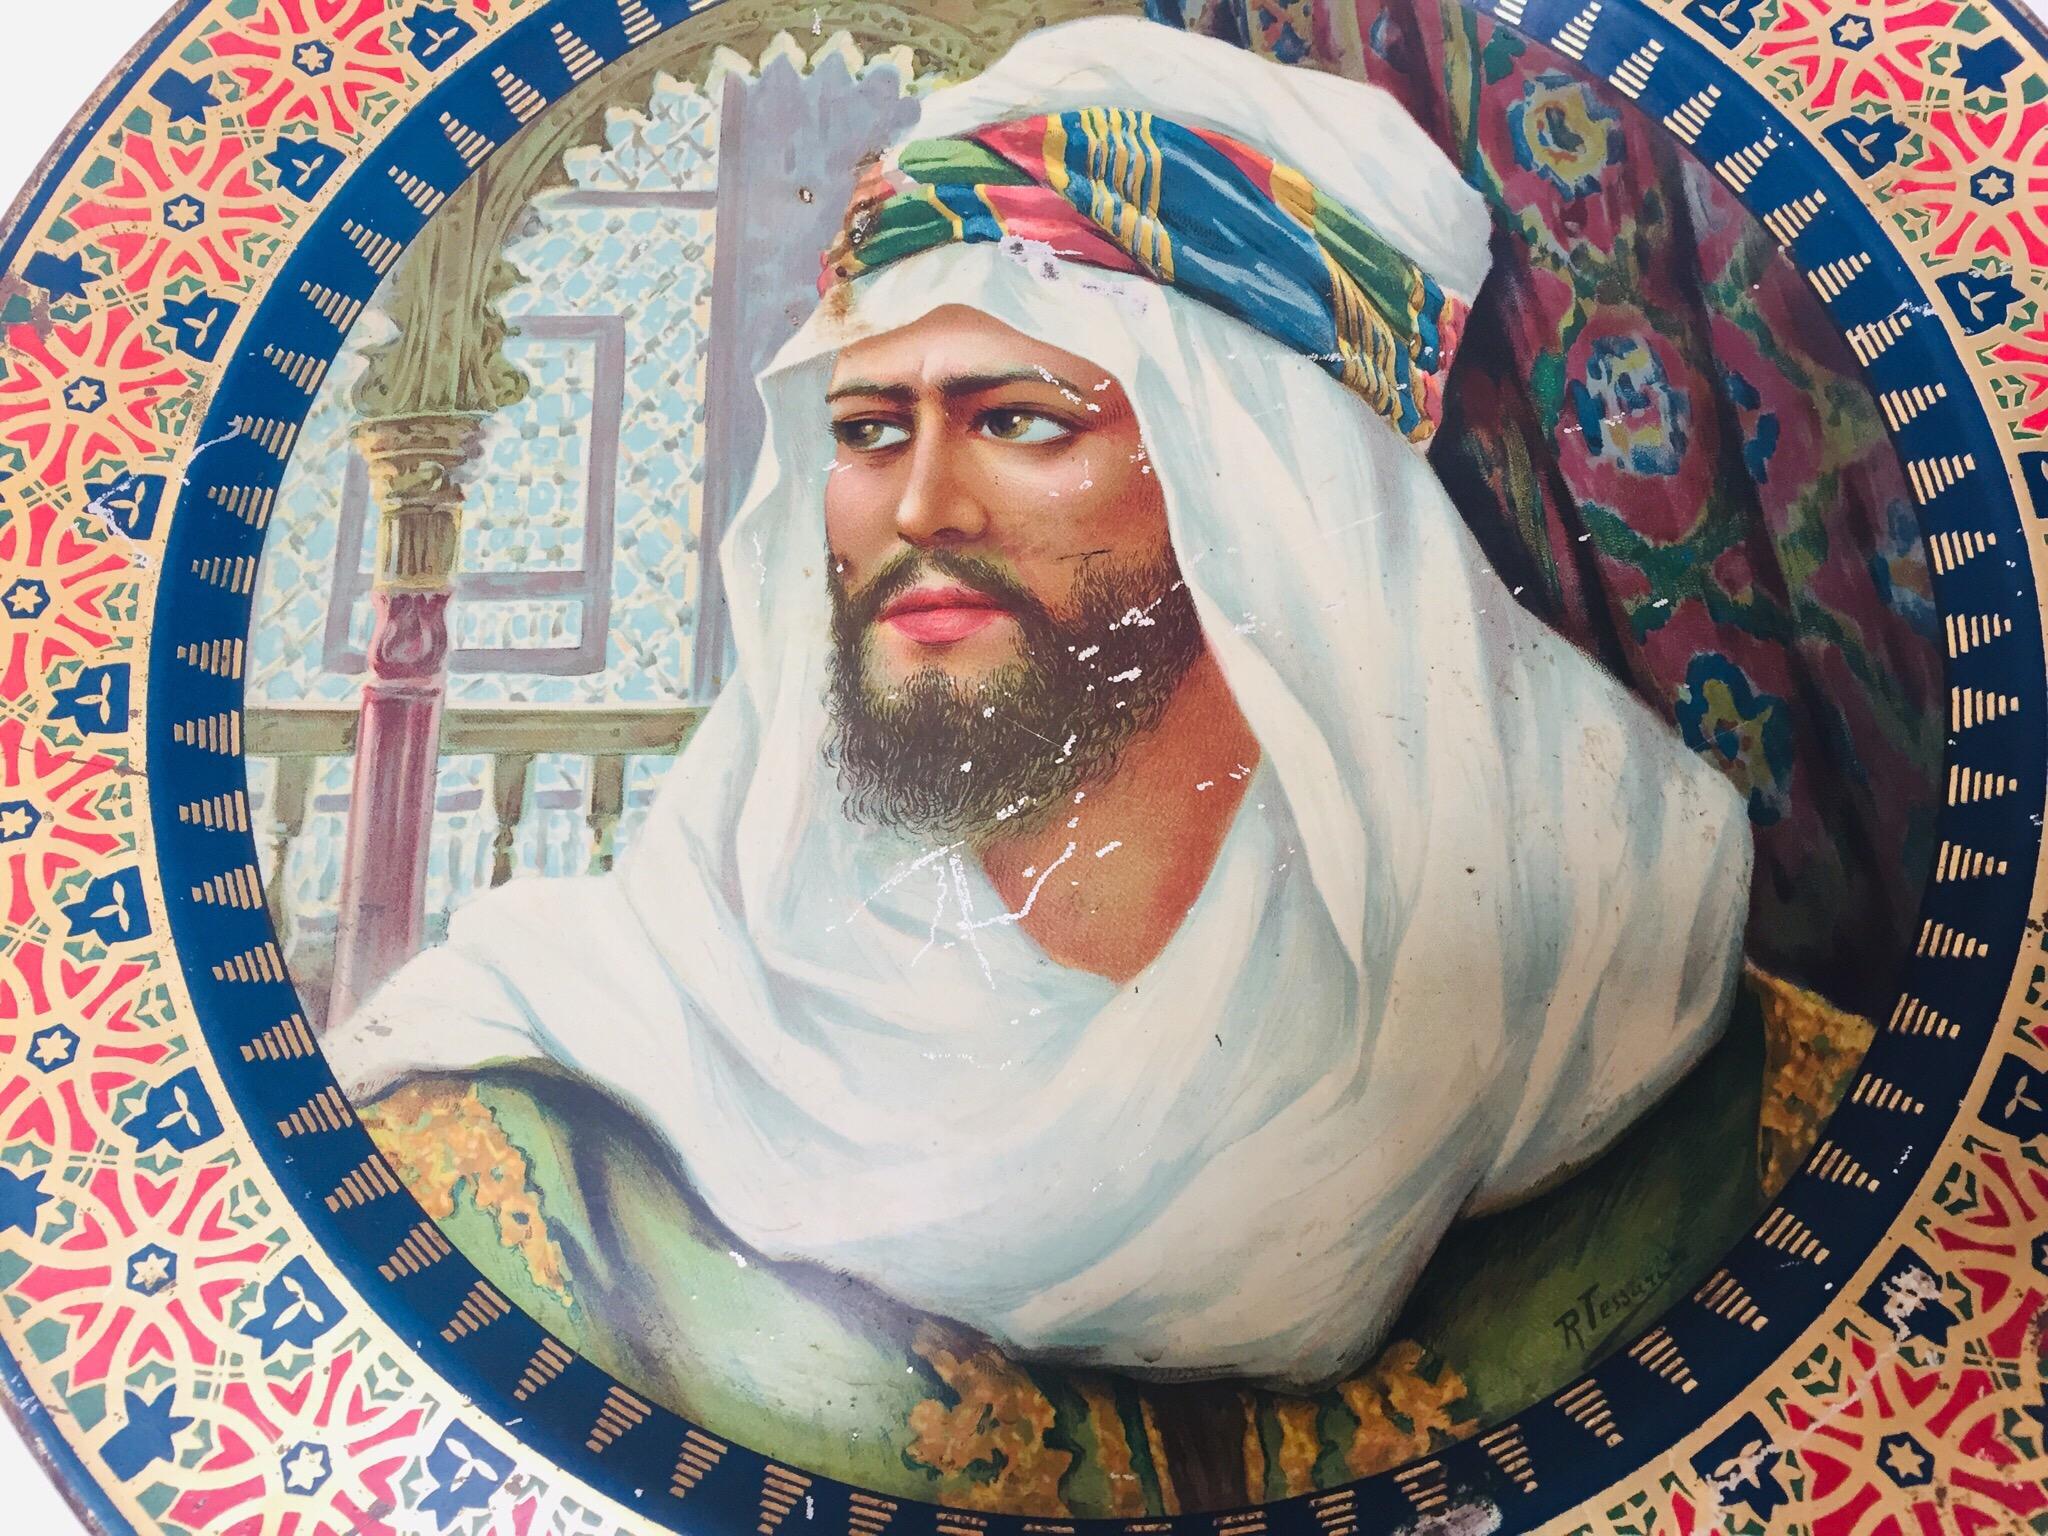 El Cafeto Metal Hanging Advertising Plate with a Moorish Prince 7